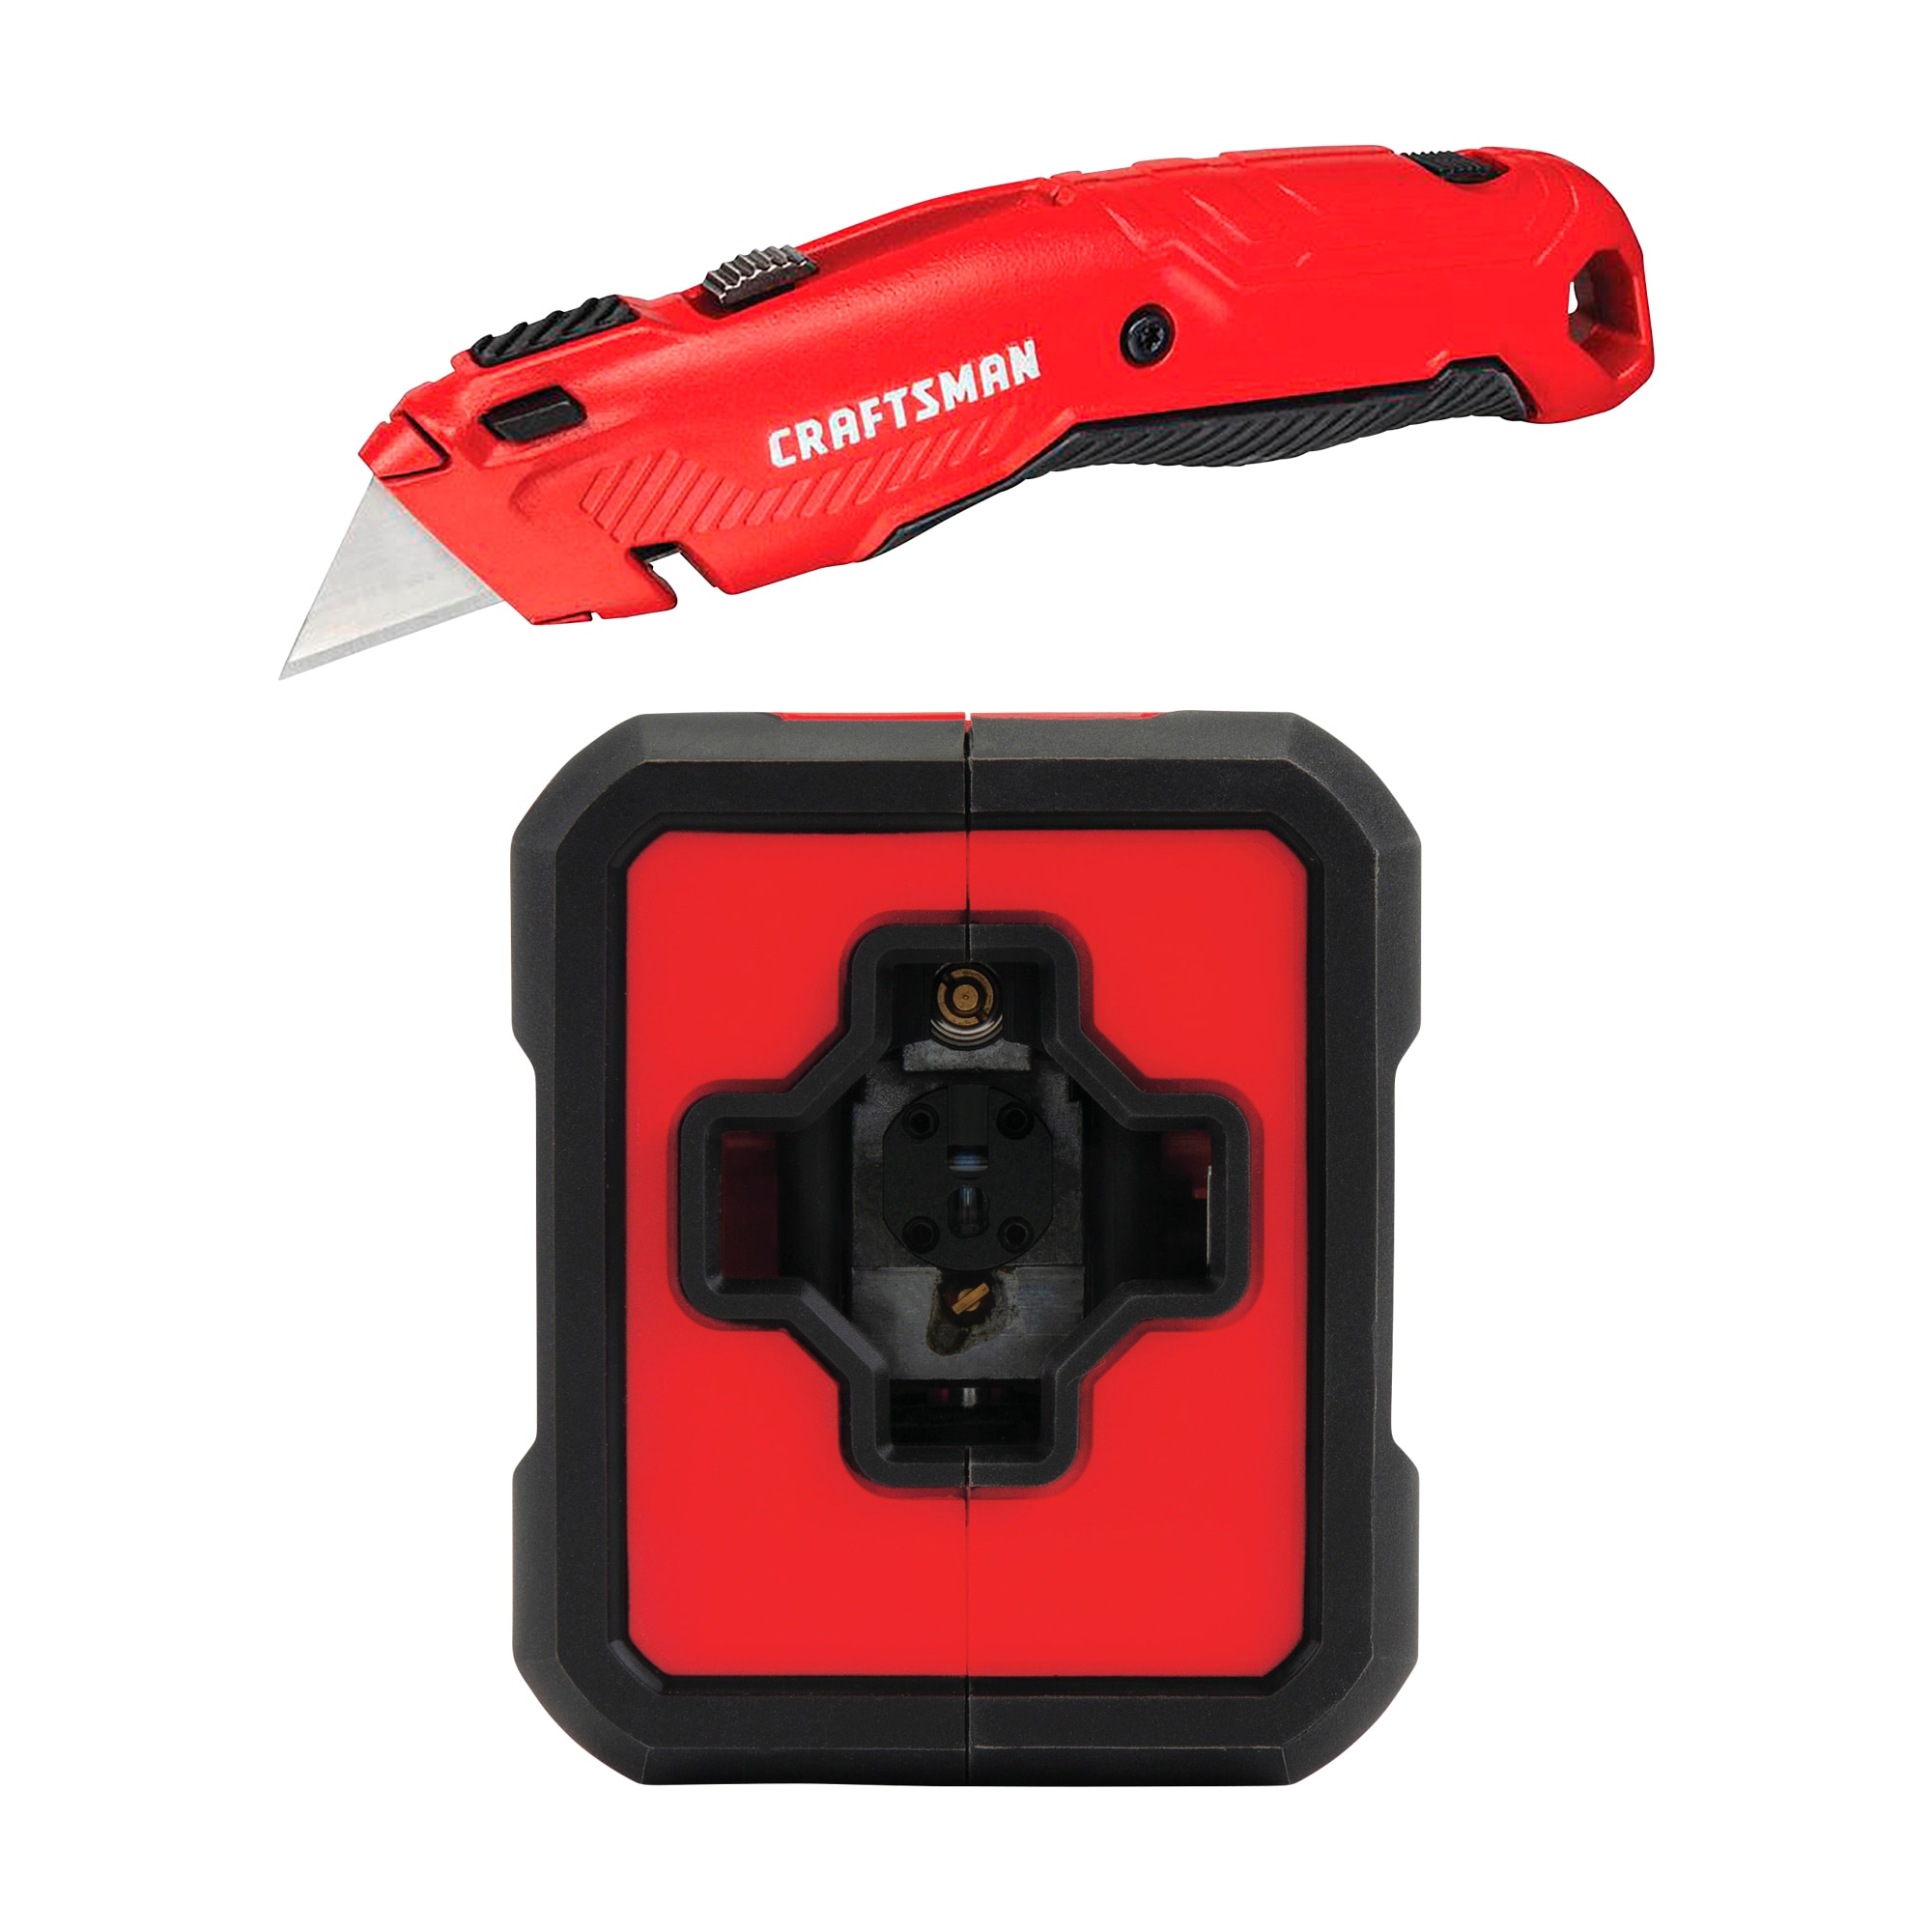 CRAFTSMAN 3/4-in 3-Blade Retractable Utility Knife with On Tool Blade Storage & 36-ft Self-Leveling Outdoor Line Generator Laser Level